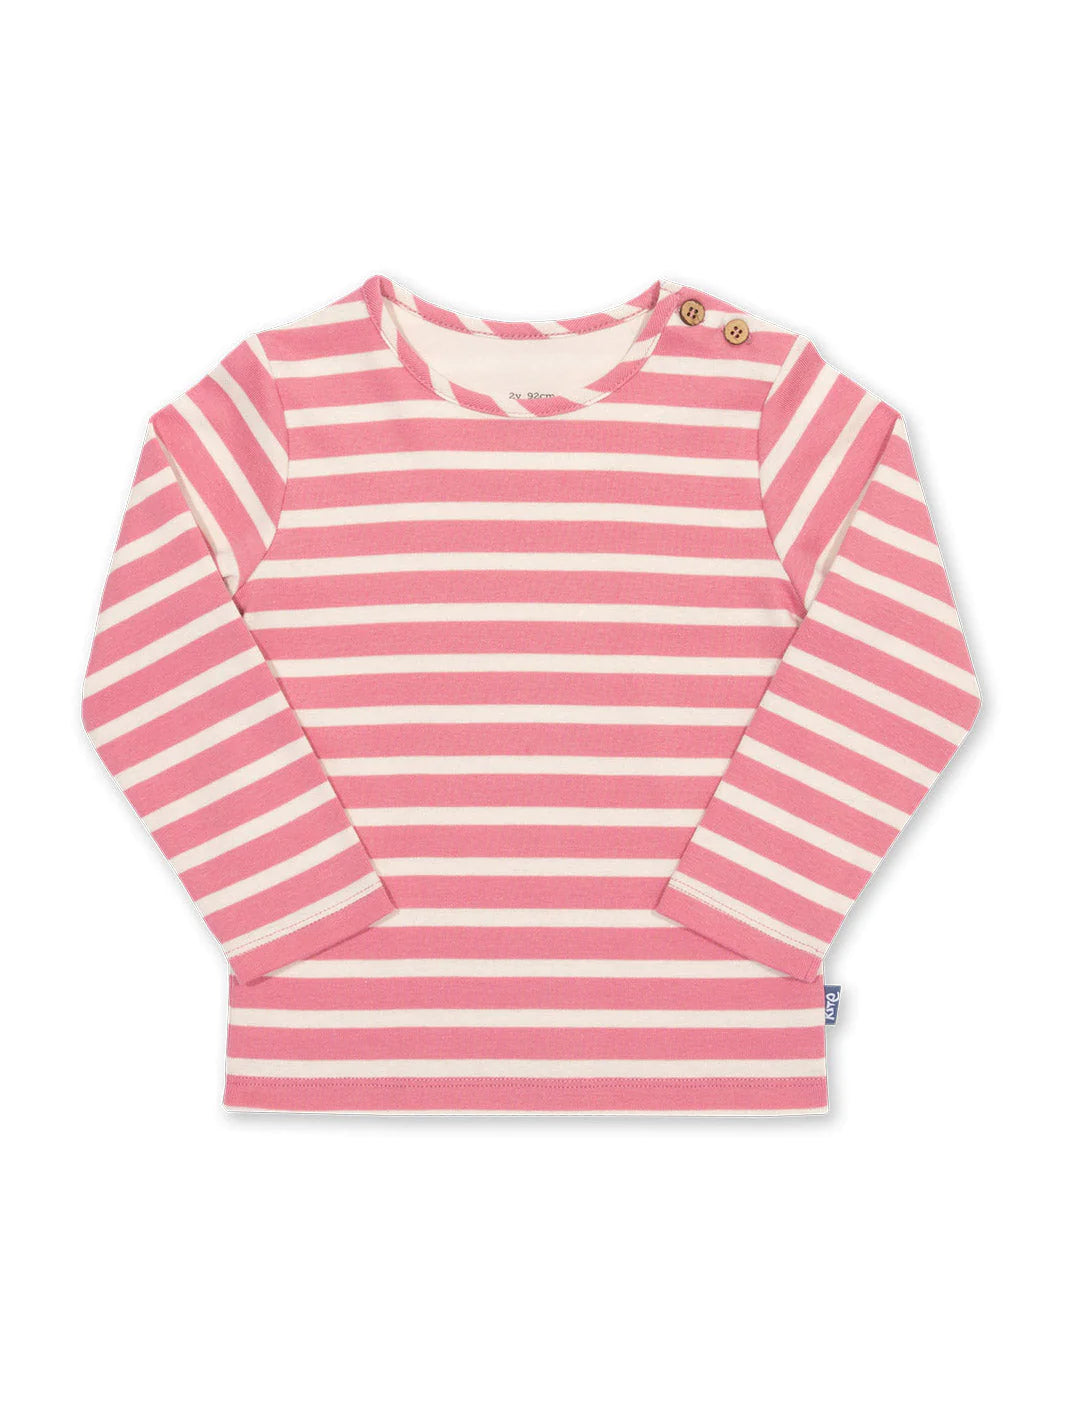 Kite Dusty Pink and Cream Breton Top